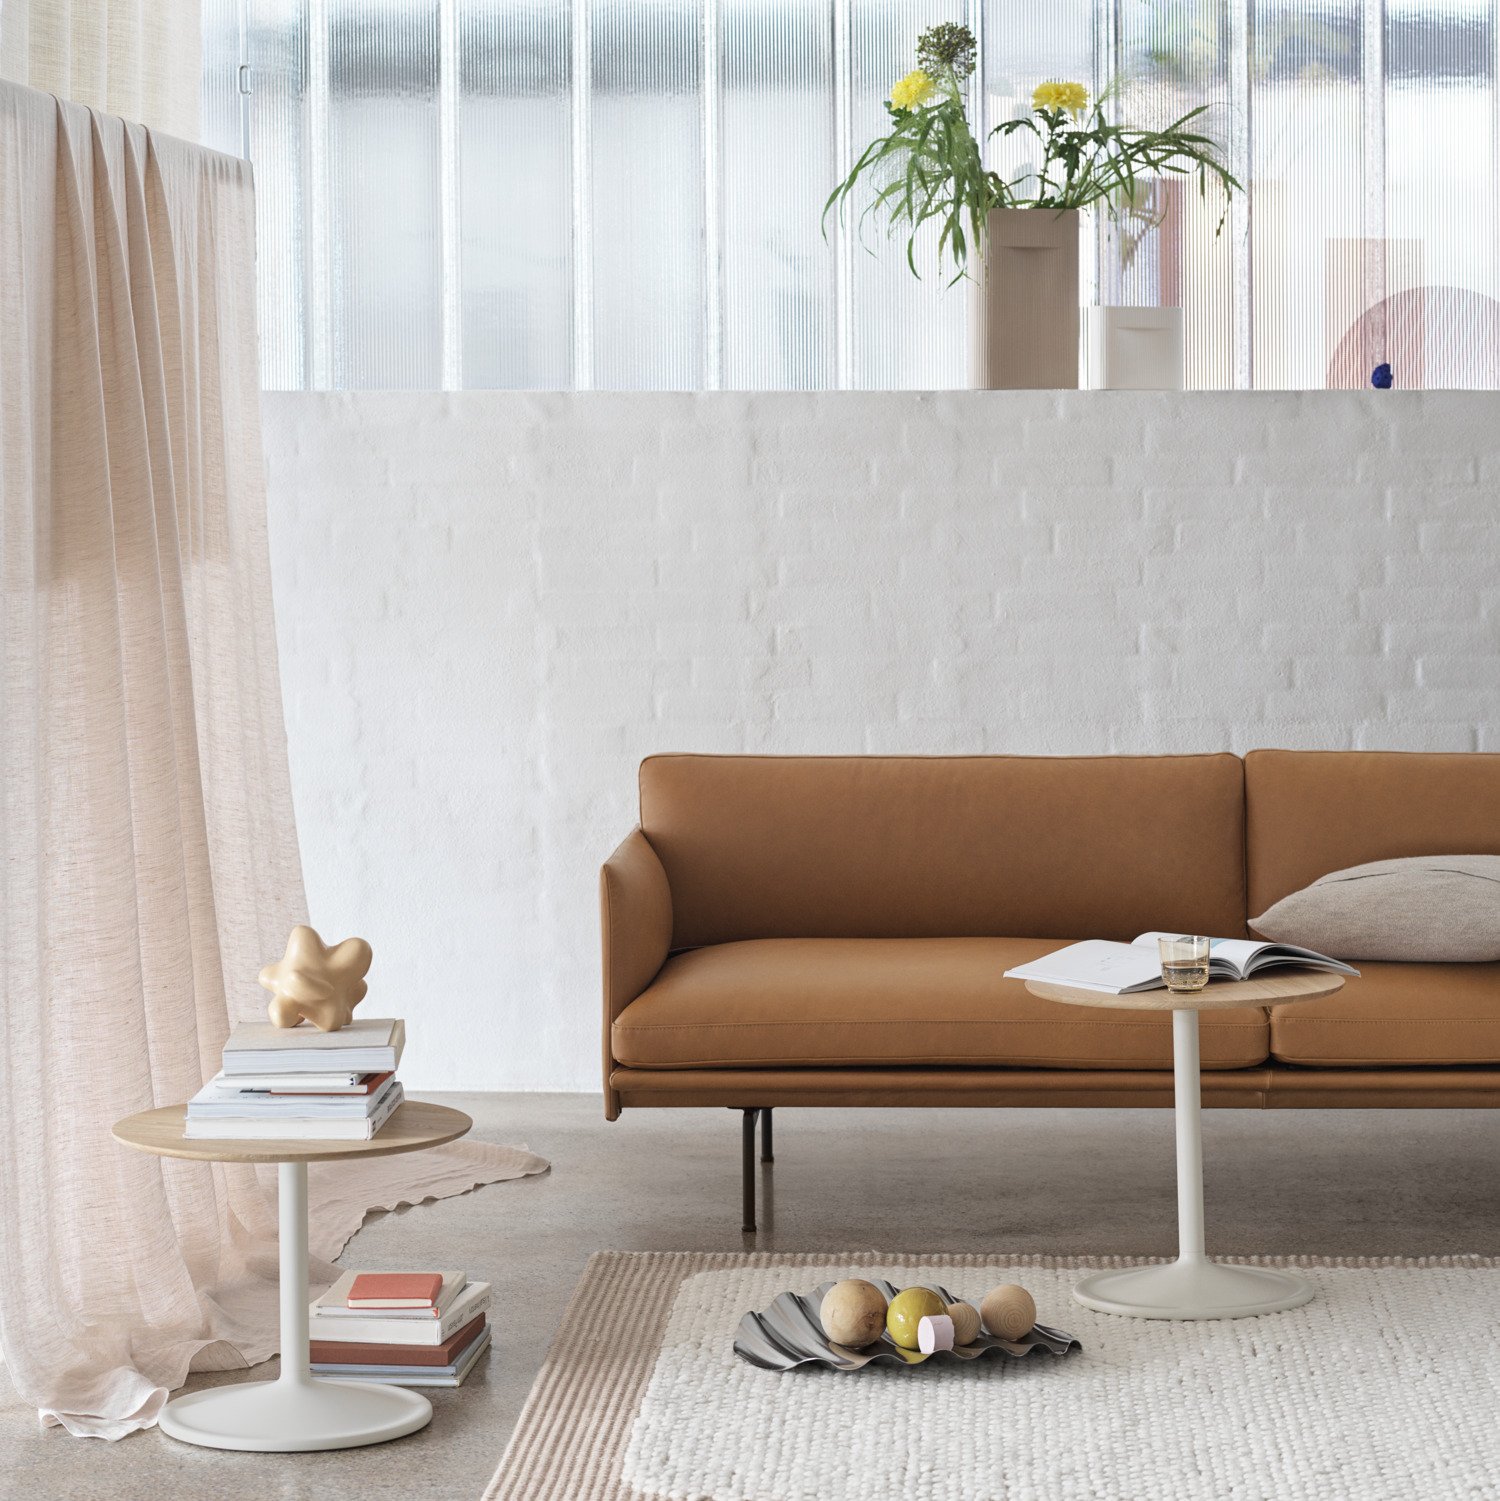 Zuigeling flauw variabel The Outline Sofa Family